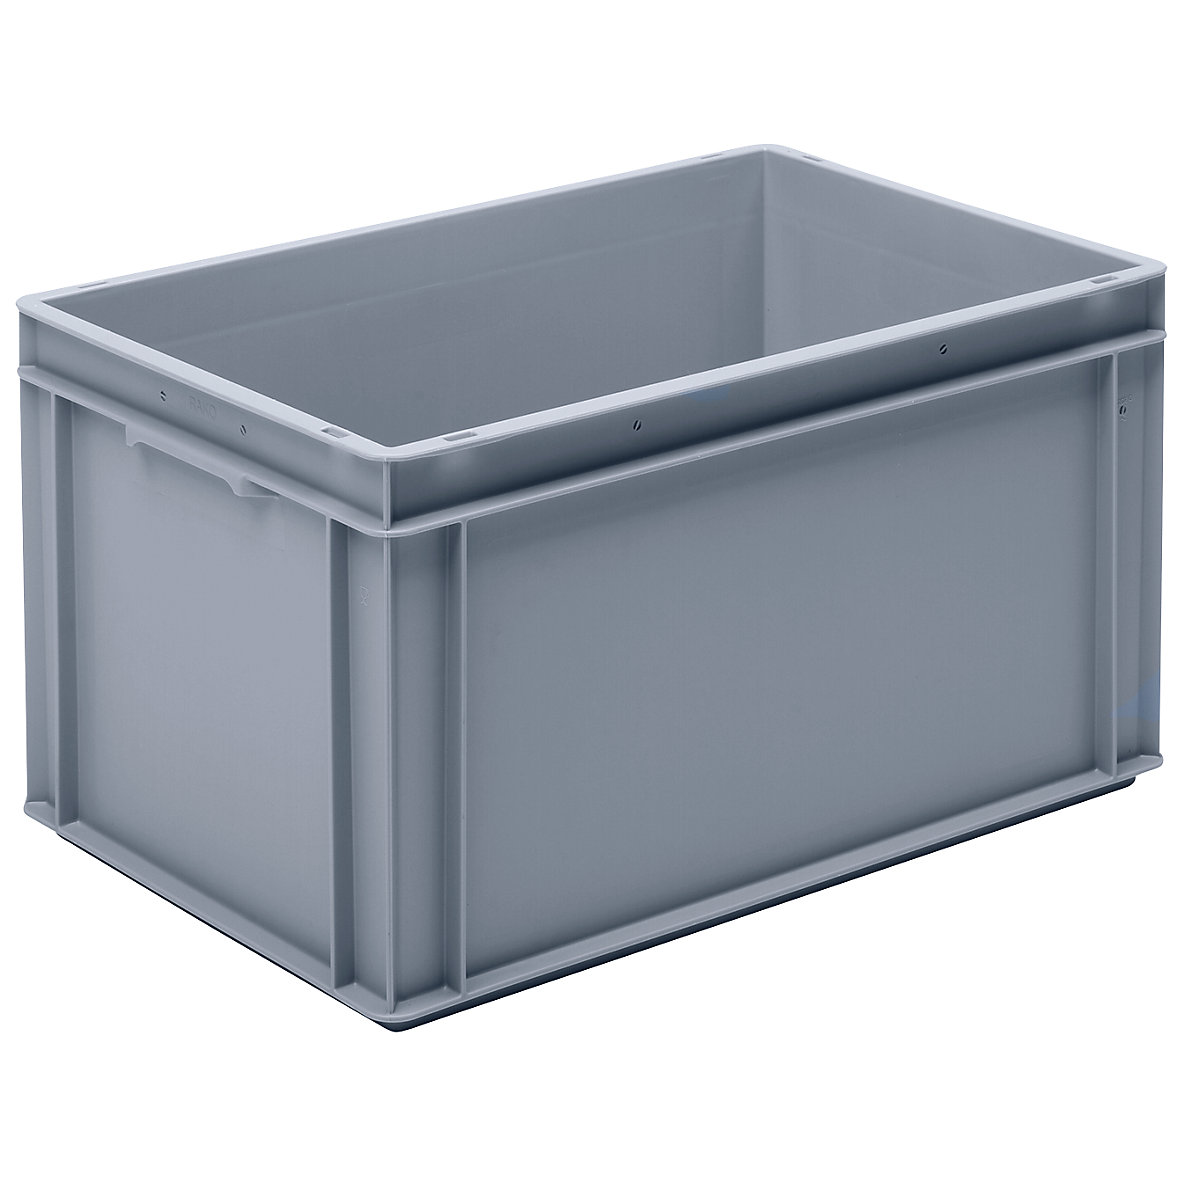 Euro stacking container made of polypropylene (PP), max. load 20 kg, silver grey, capacity 60 l, external height 325 mm, pack of 2